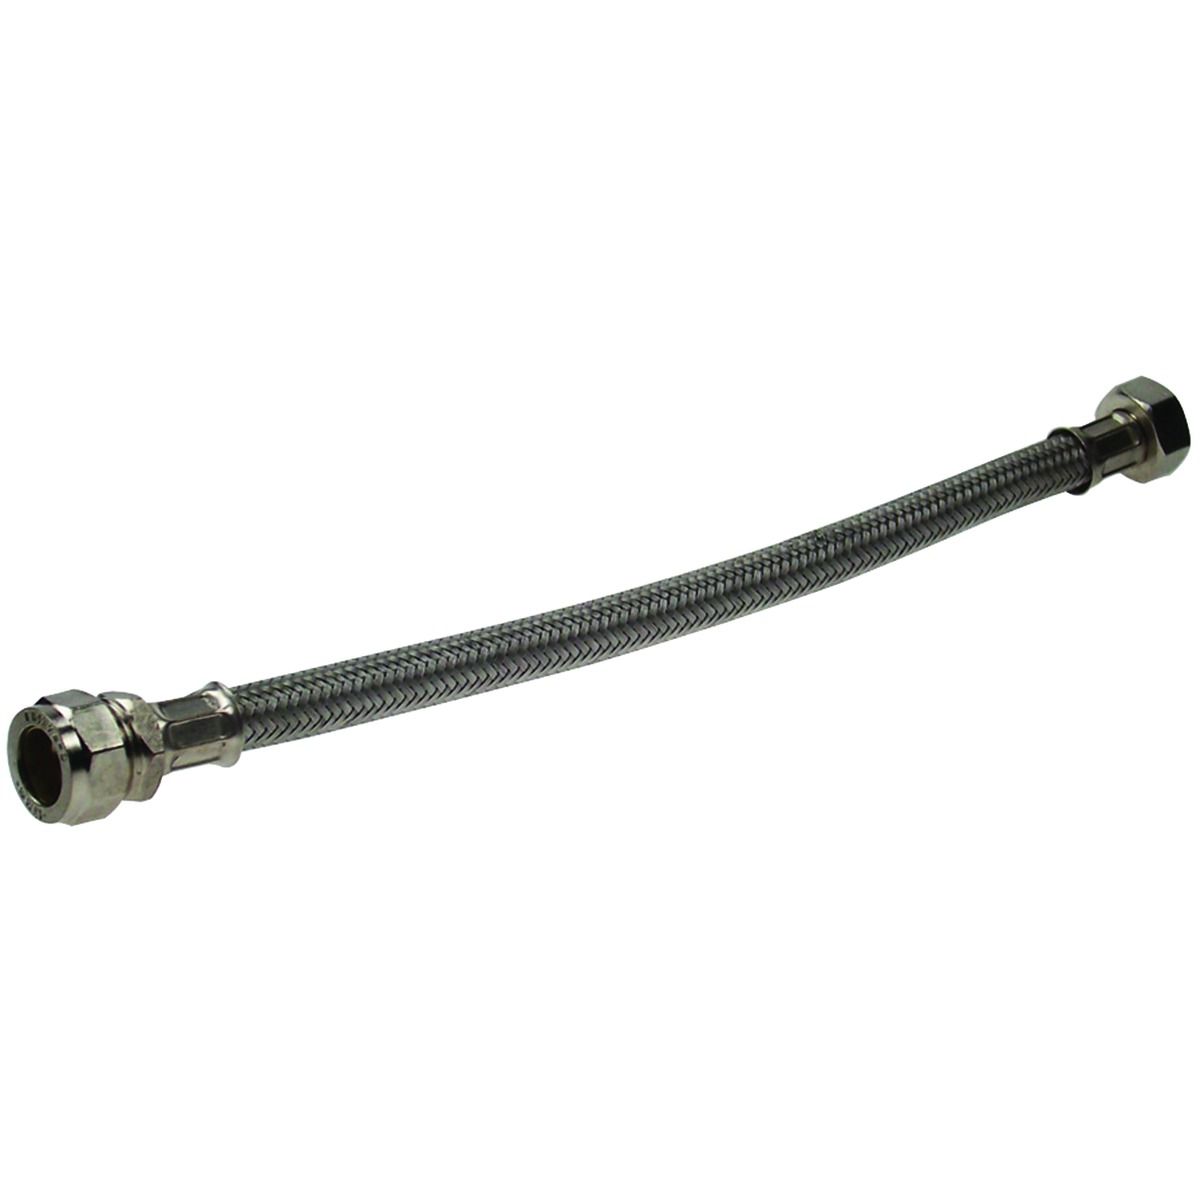 Image of Primaflow Flexible Tap Connector - 22 X 19 X 300mm